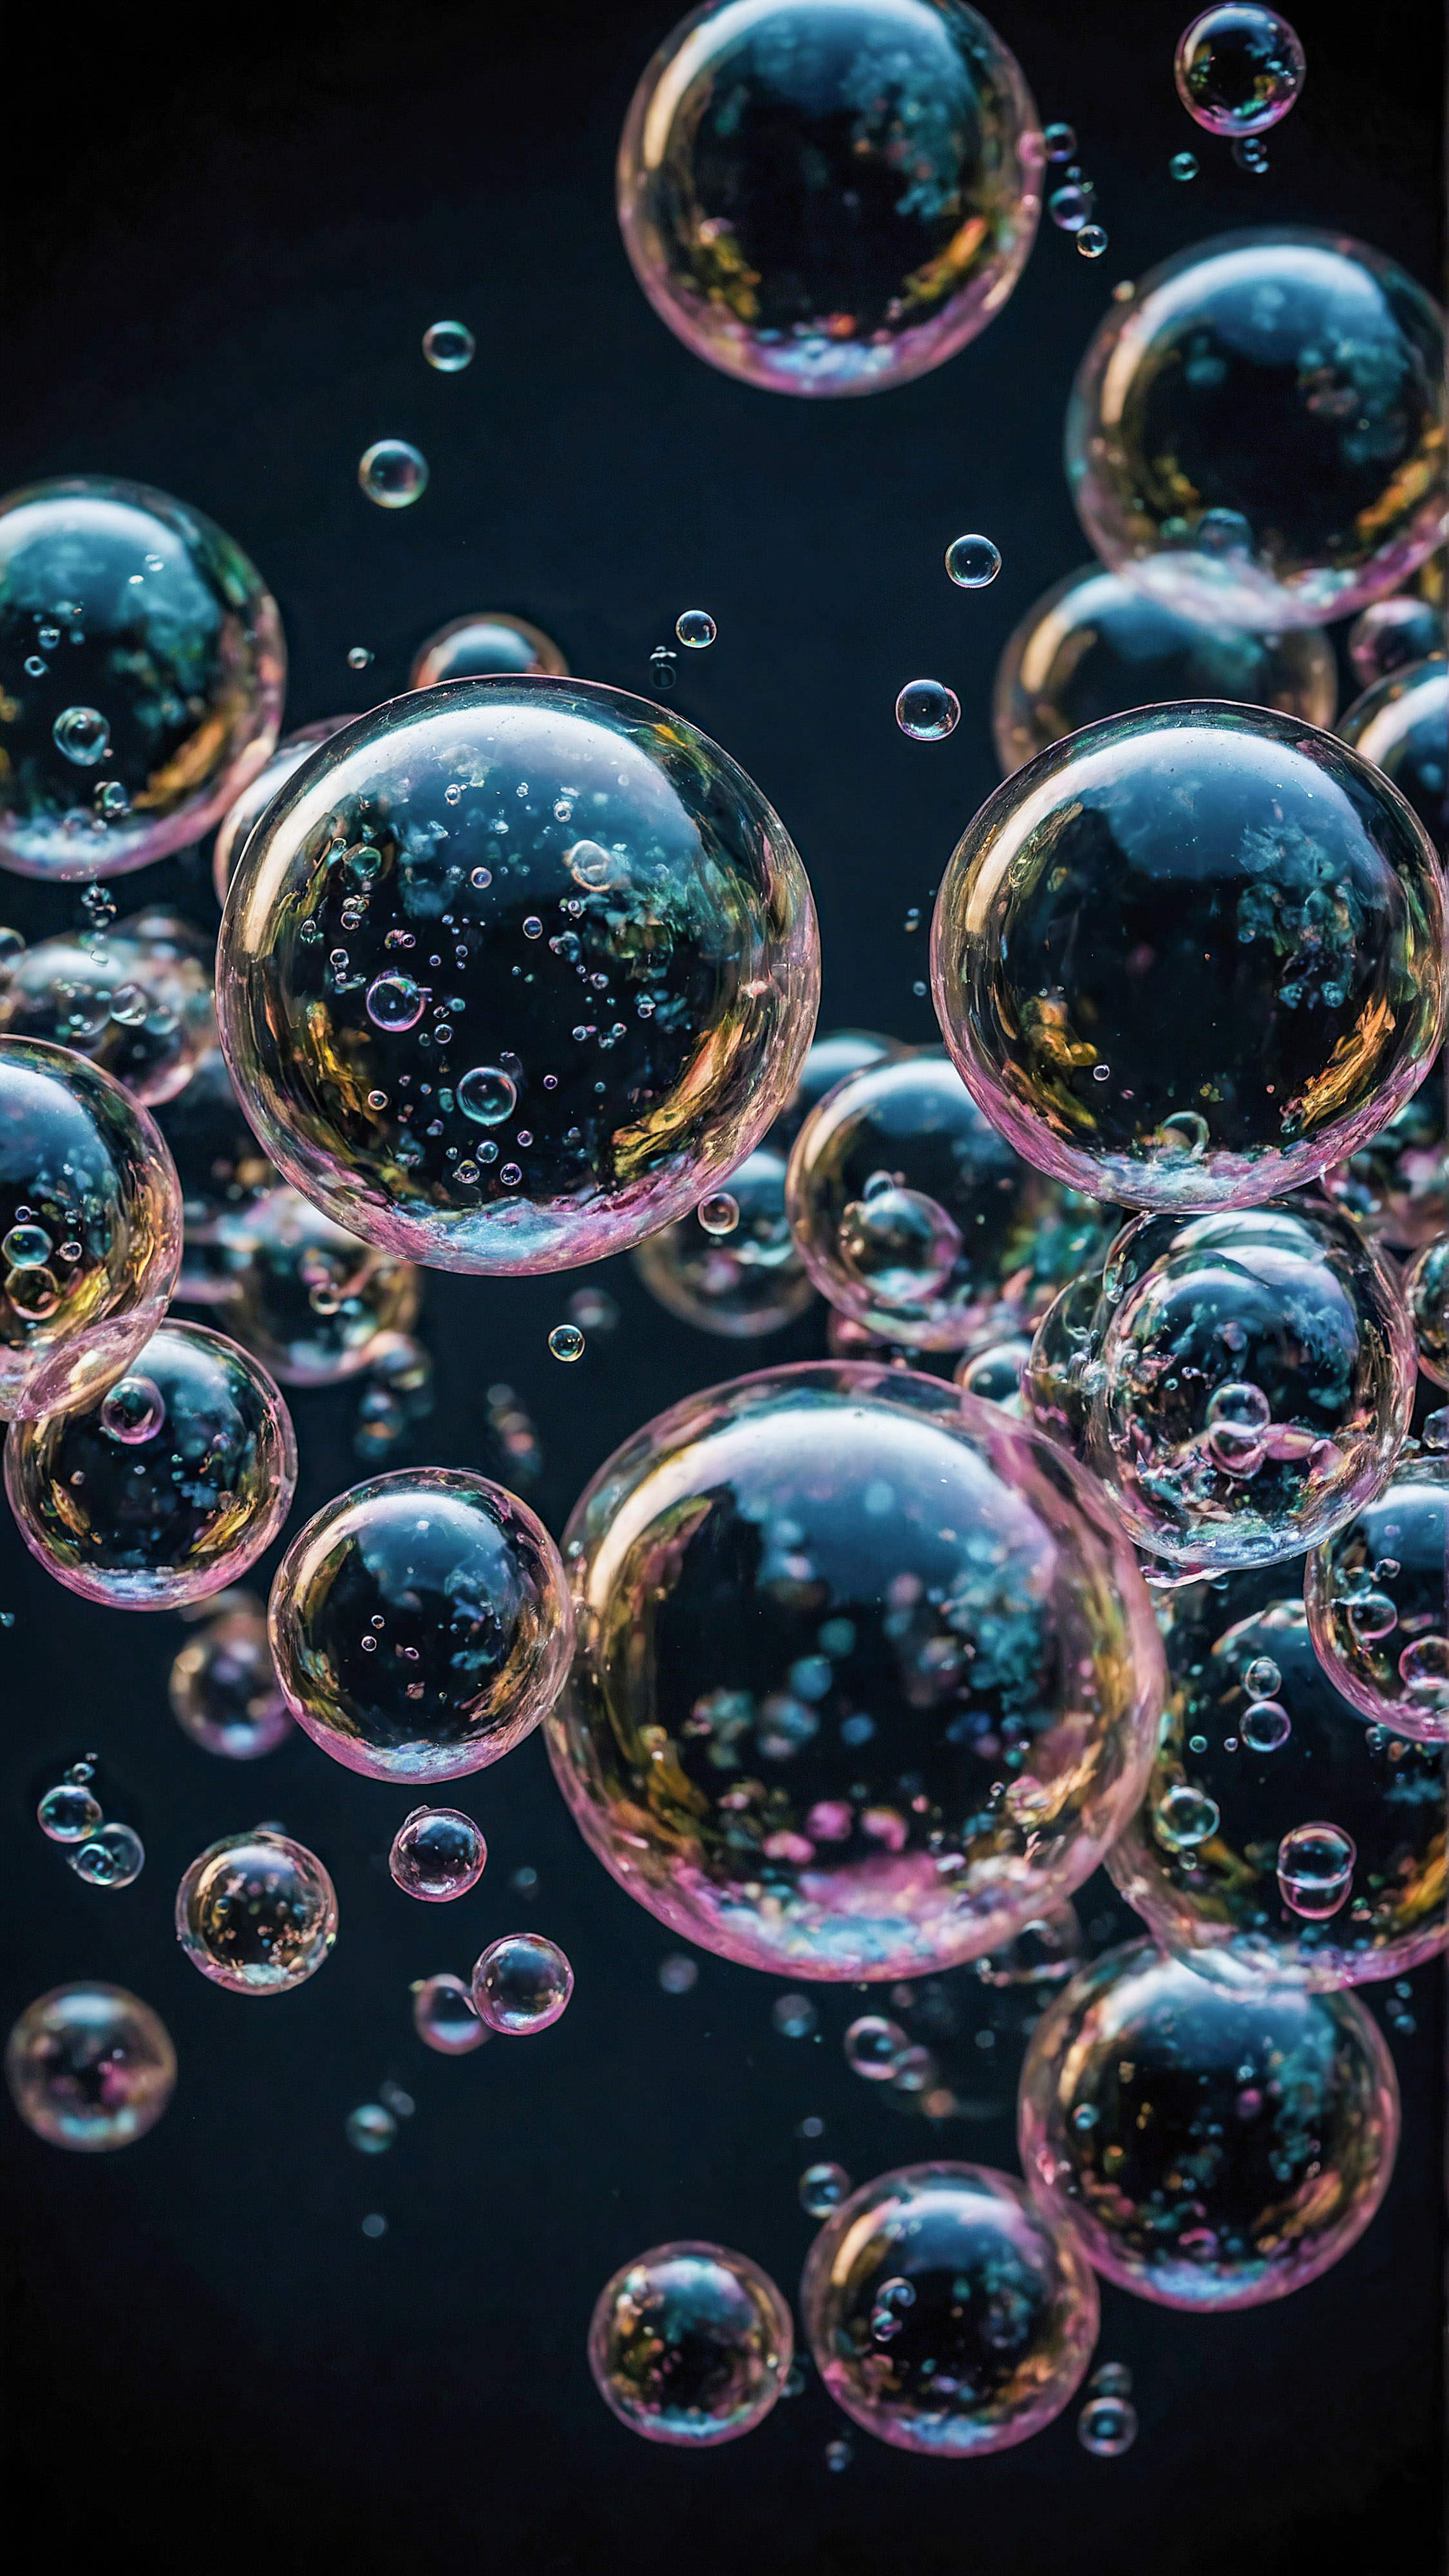 Experience the magic of our 4K iPhone lock screen wallpaper, portraying various sizes of bubbles floating amidst a dark background, illuminated to showcase their detailed surfaces and the light reflections on them.